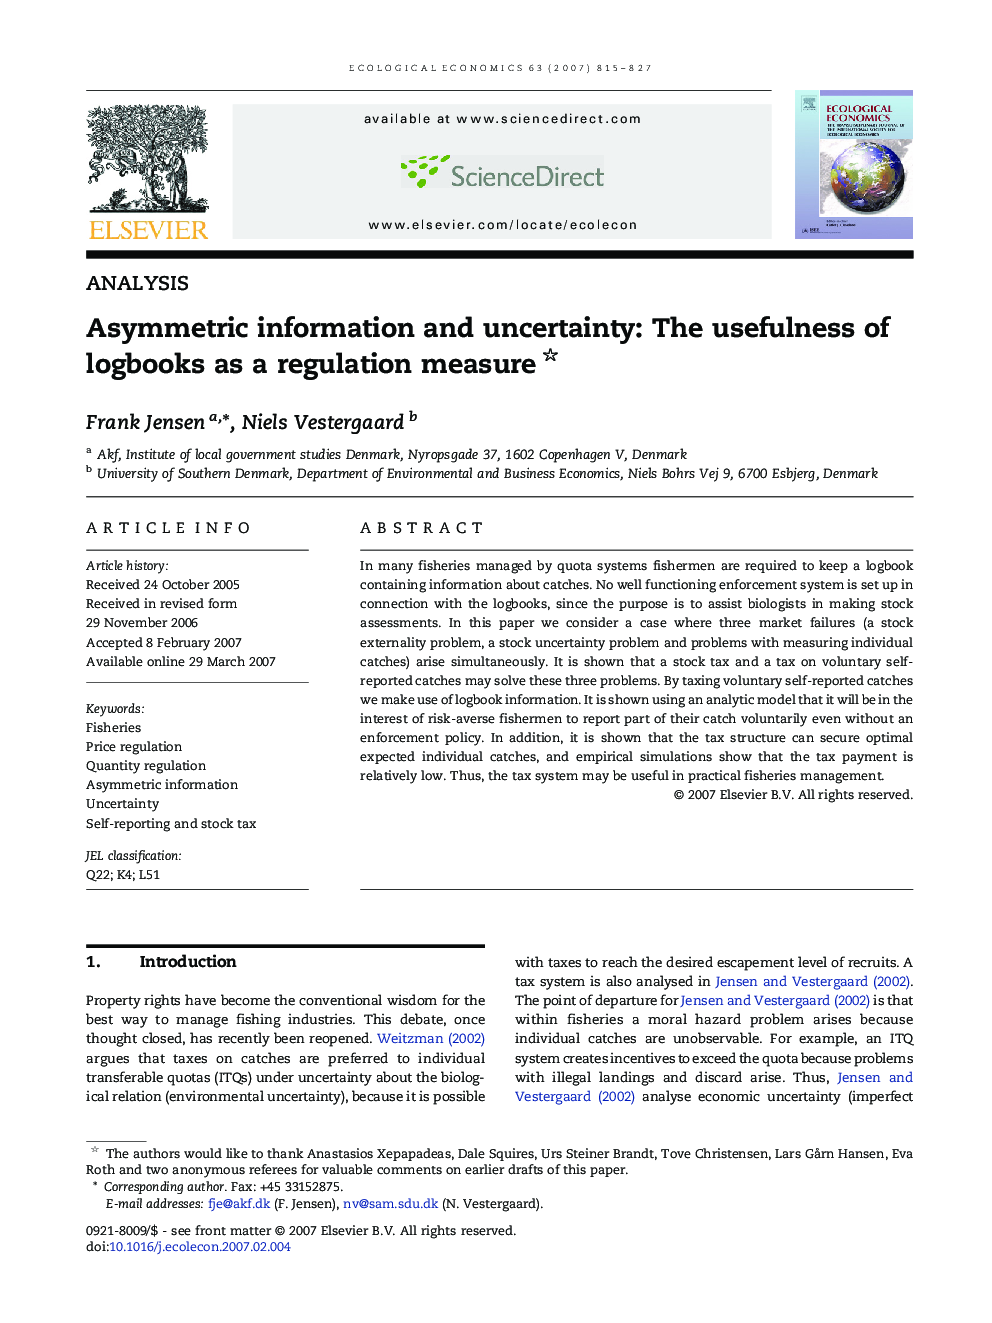 Asymmetric information and uncertainty: The usefulness of logbooks as a regulation measure